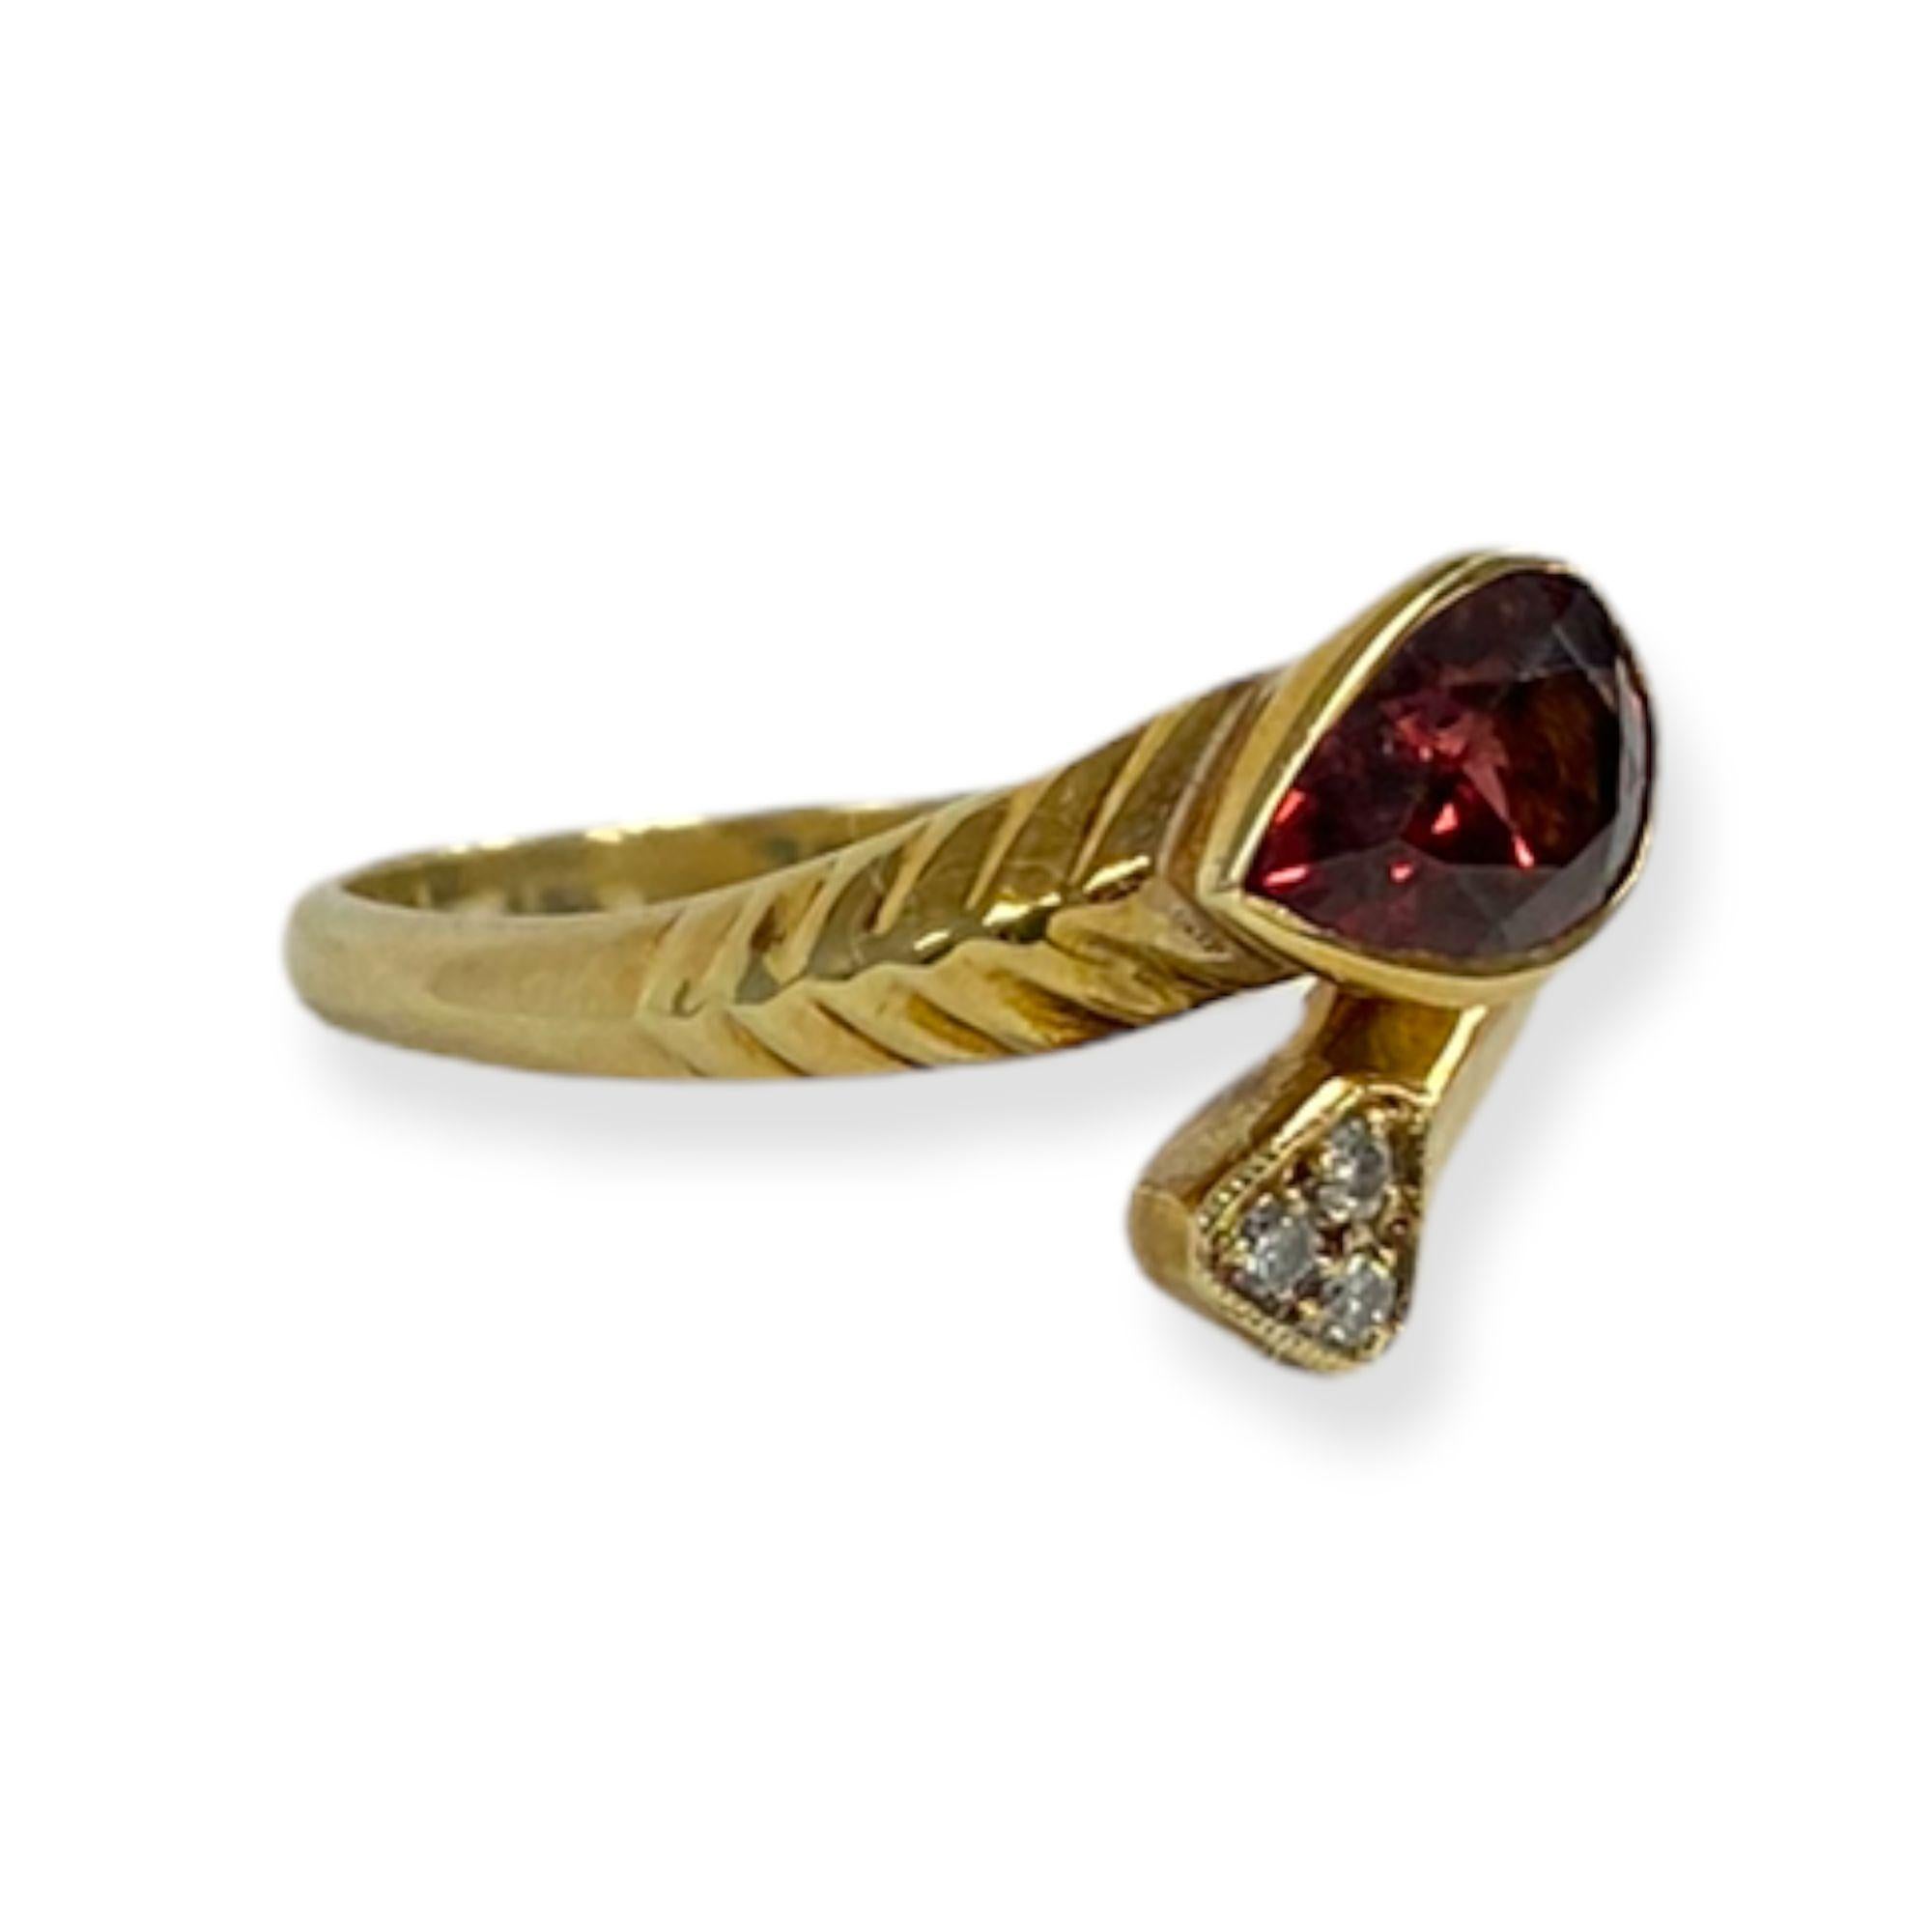 This spectacular ring from the Suzy Levian collection features 14k gold. An array of white diamonds (.05cttw) accent the perfect red color of the garnet gemstone center stone (1.50ct) The brilliance of these gems and the luster of the high-polish